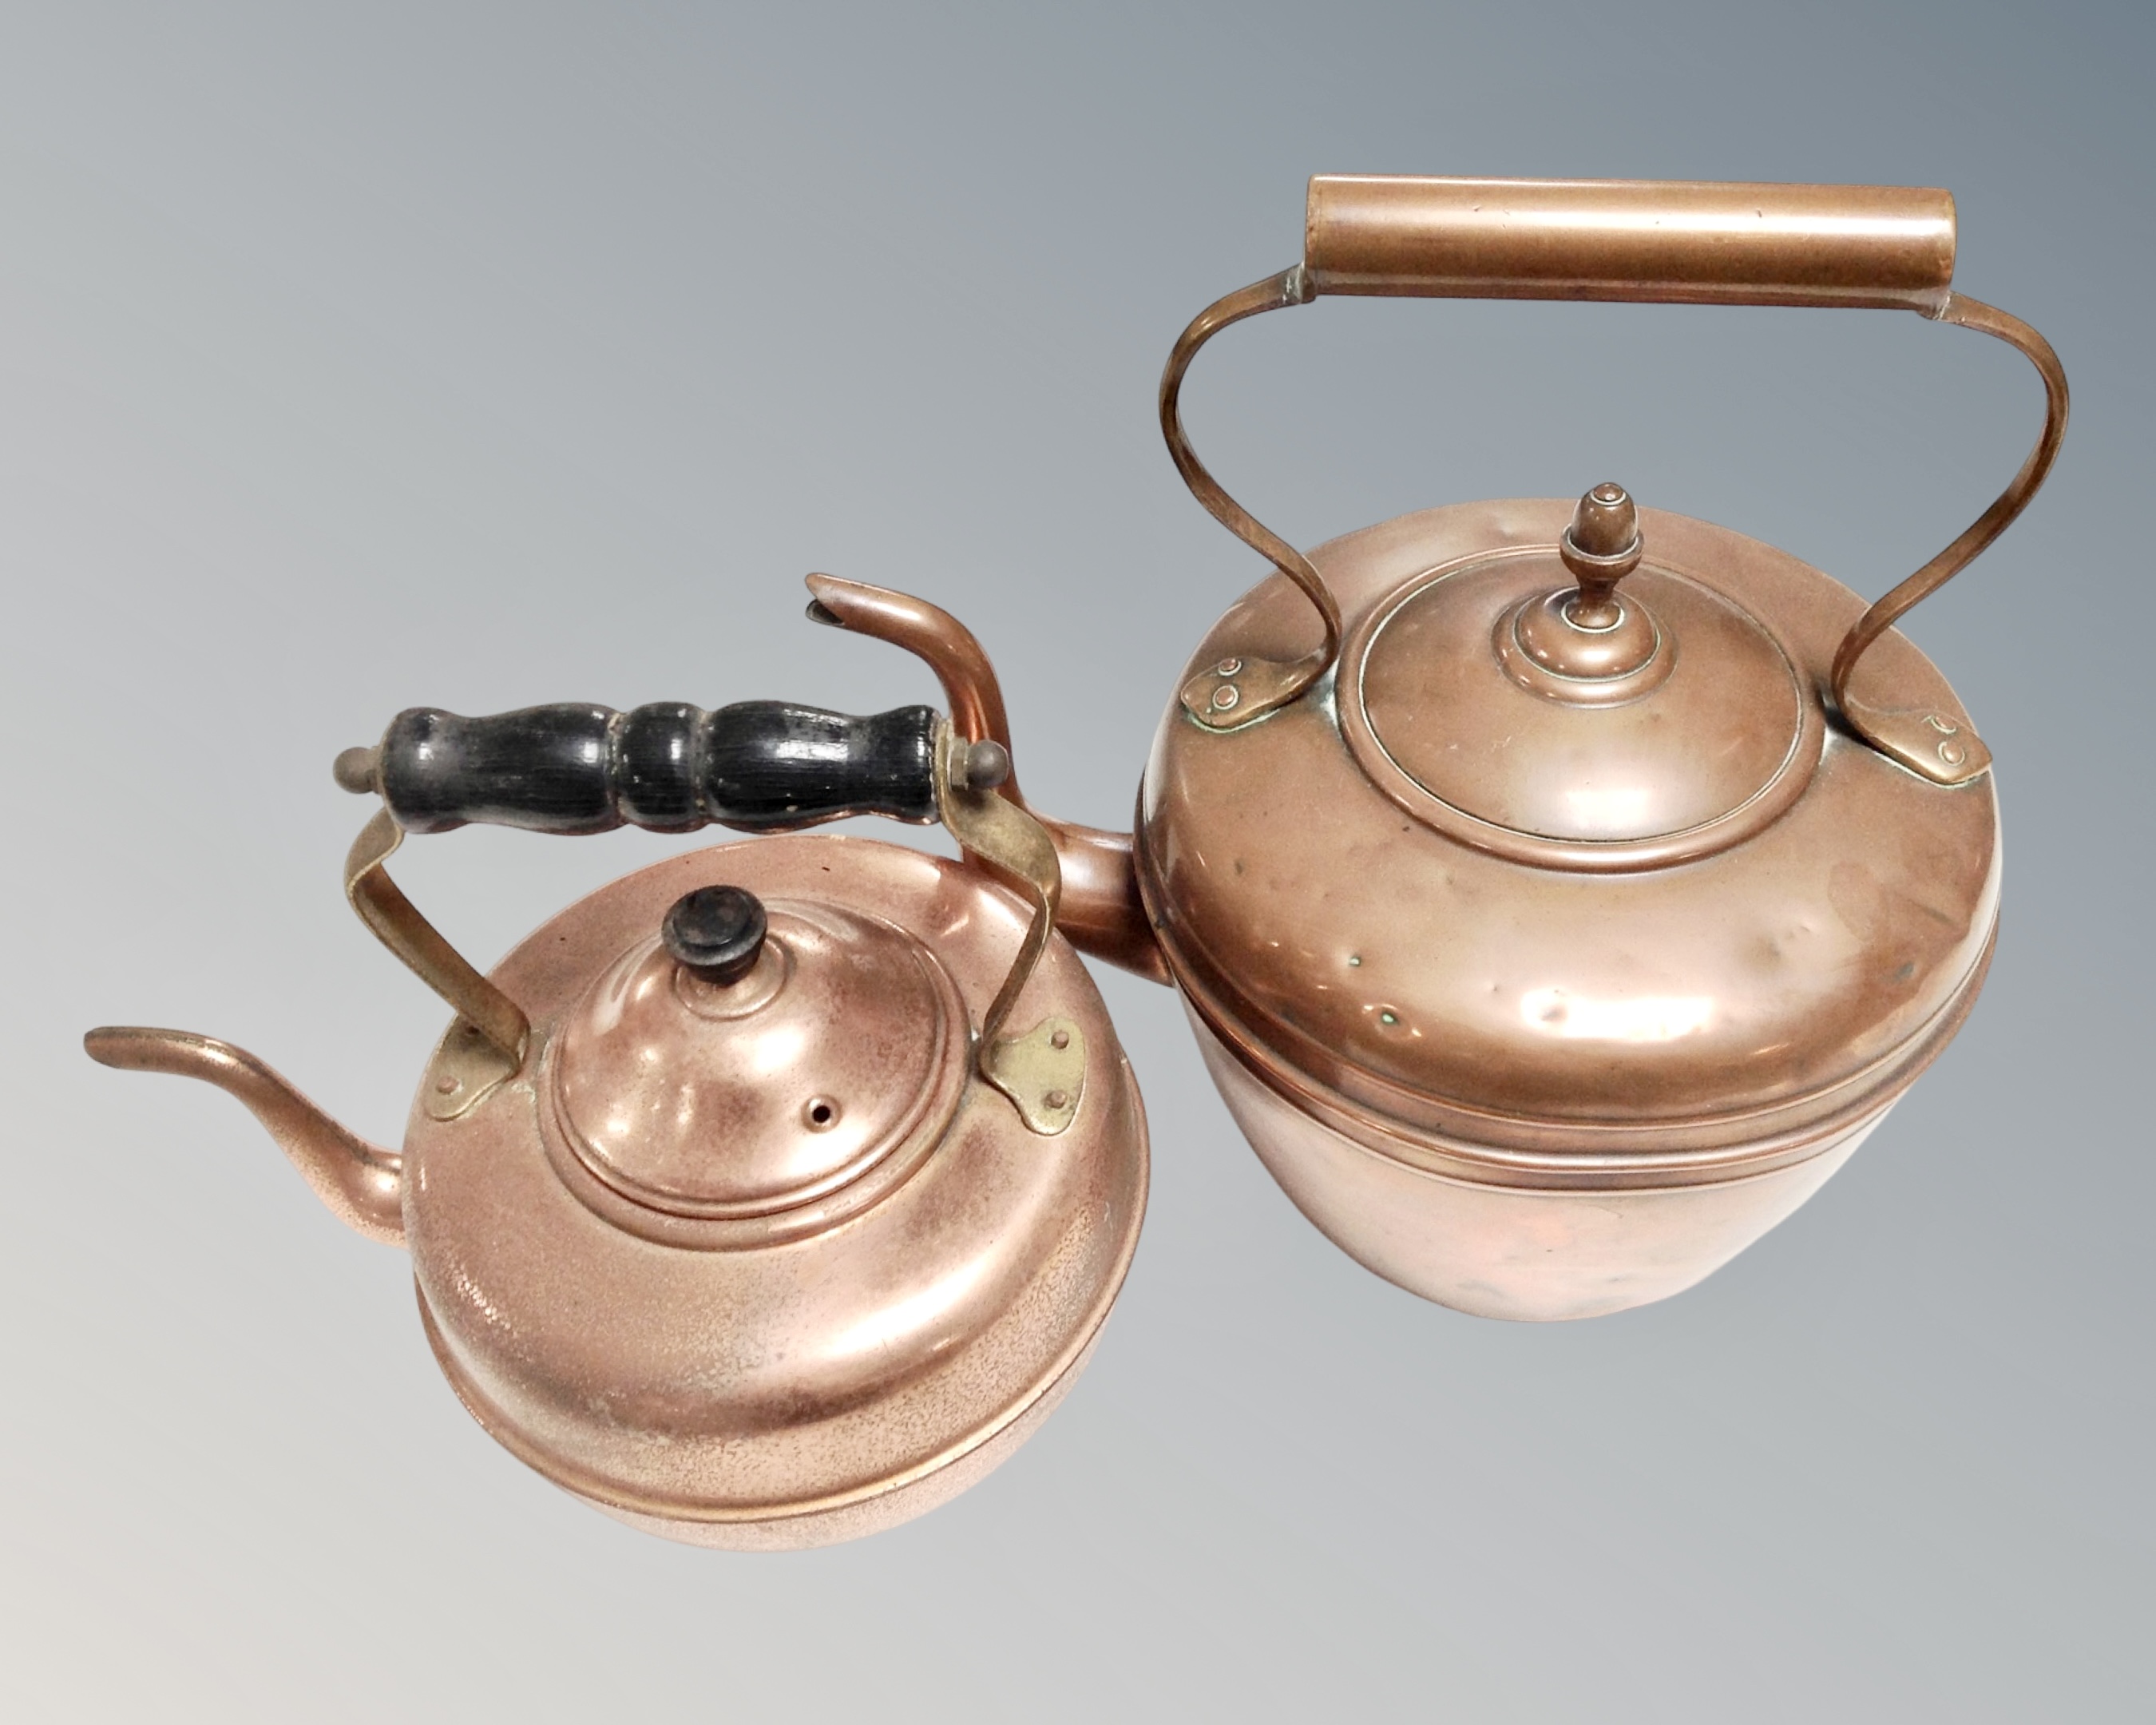 A 19th century copper kettle and further copper kettle